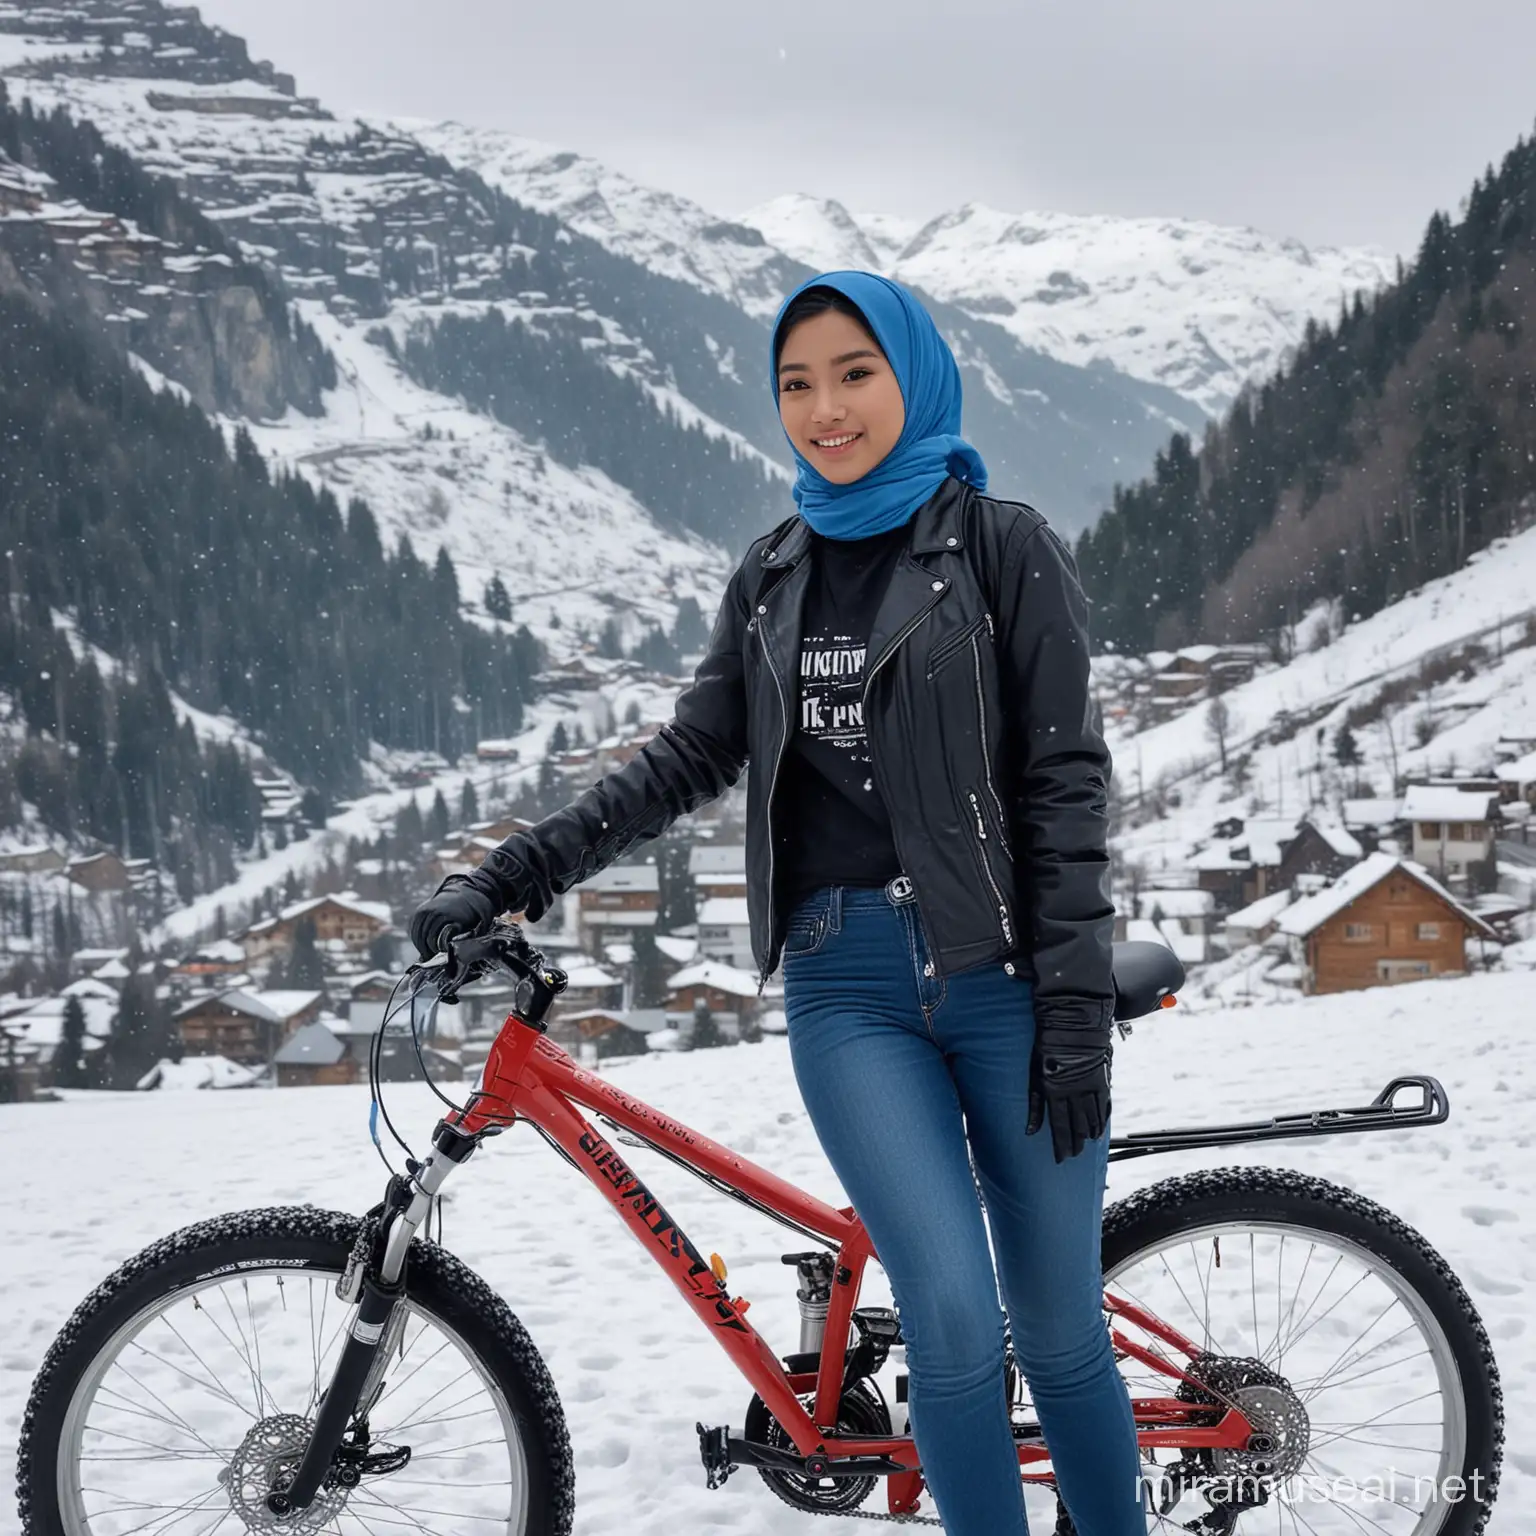 Young Indonesian Woman Cycling in Snowy Swiss Alps